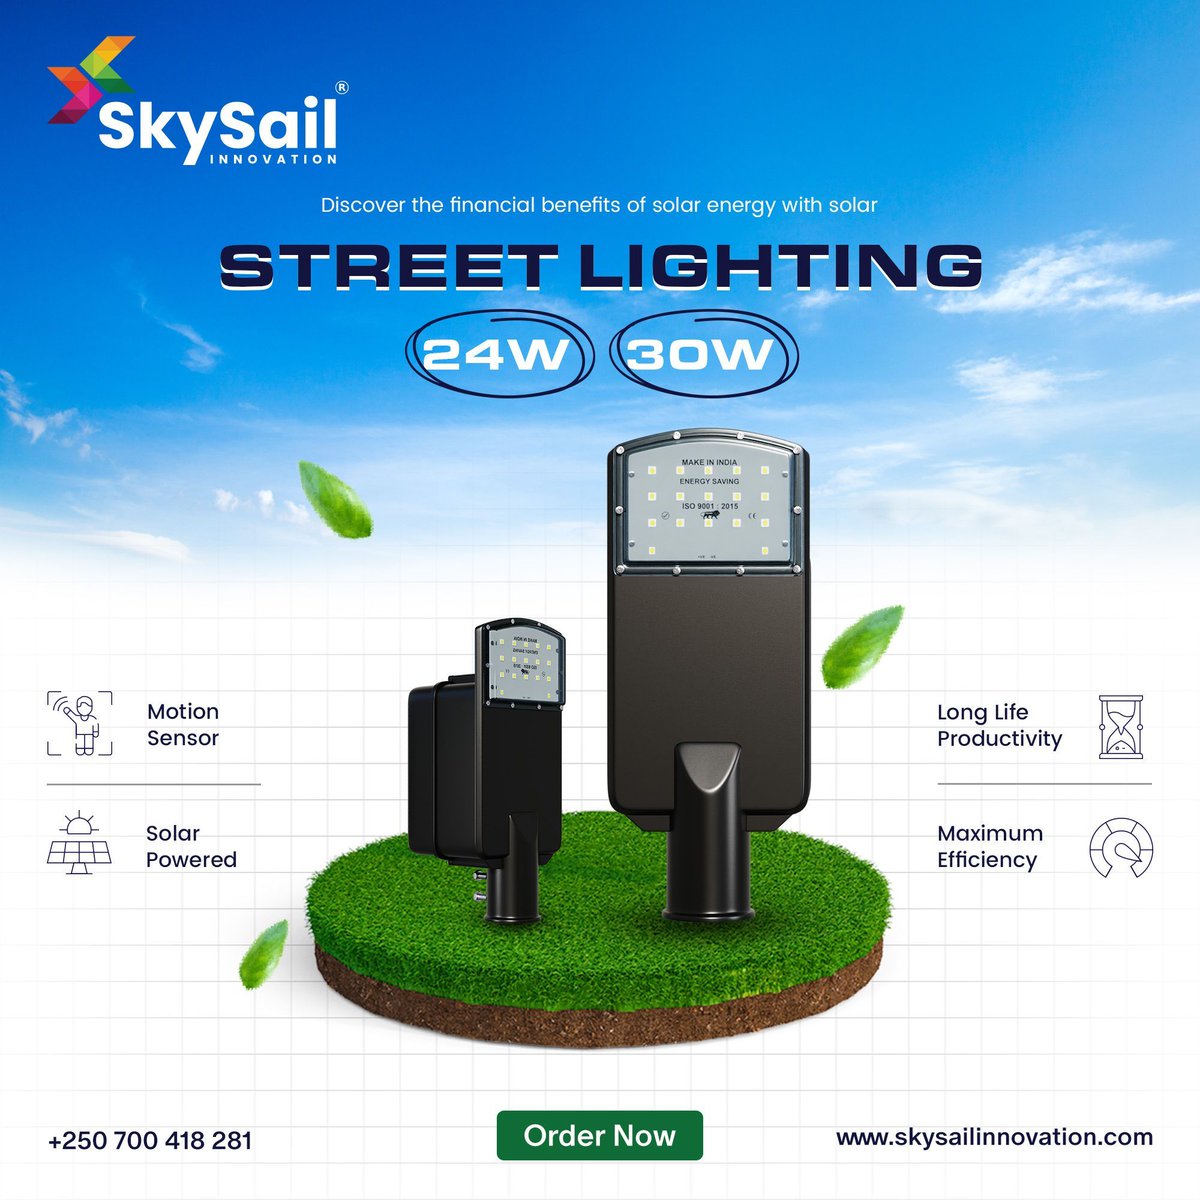 Discover the financial benefits of 24W or 30W Solar Street Lighting! Save on electricity bills with cost-effective, eco-friendly lighting solutions. Order now! #SkySailInnovation #SolarEnergy #StreetLighting #FinancialBenefits #RenewableEnergy